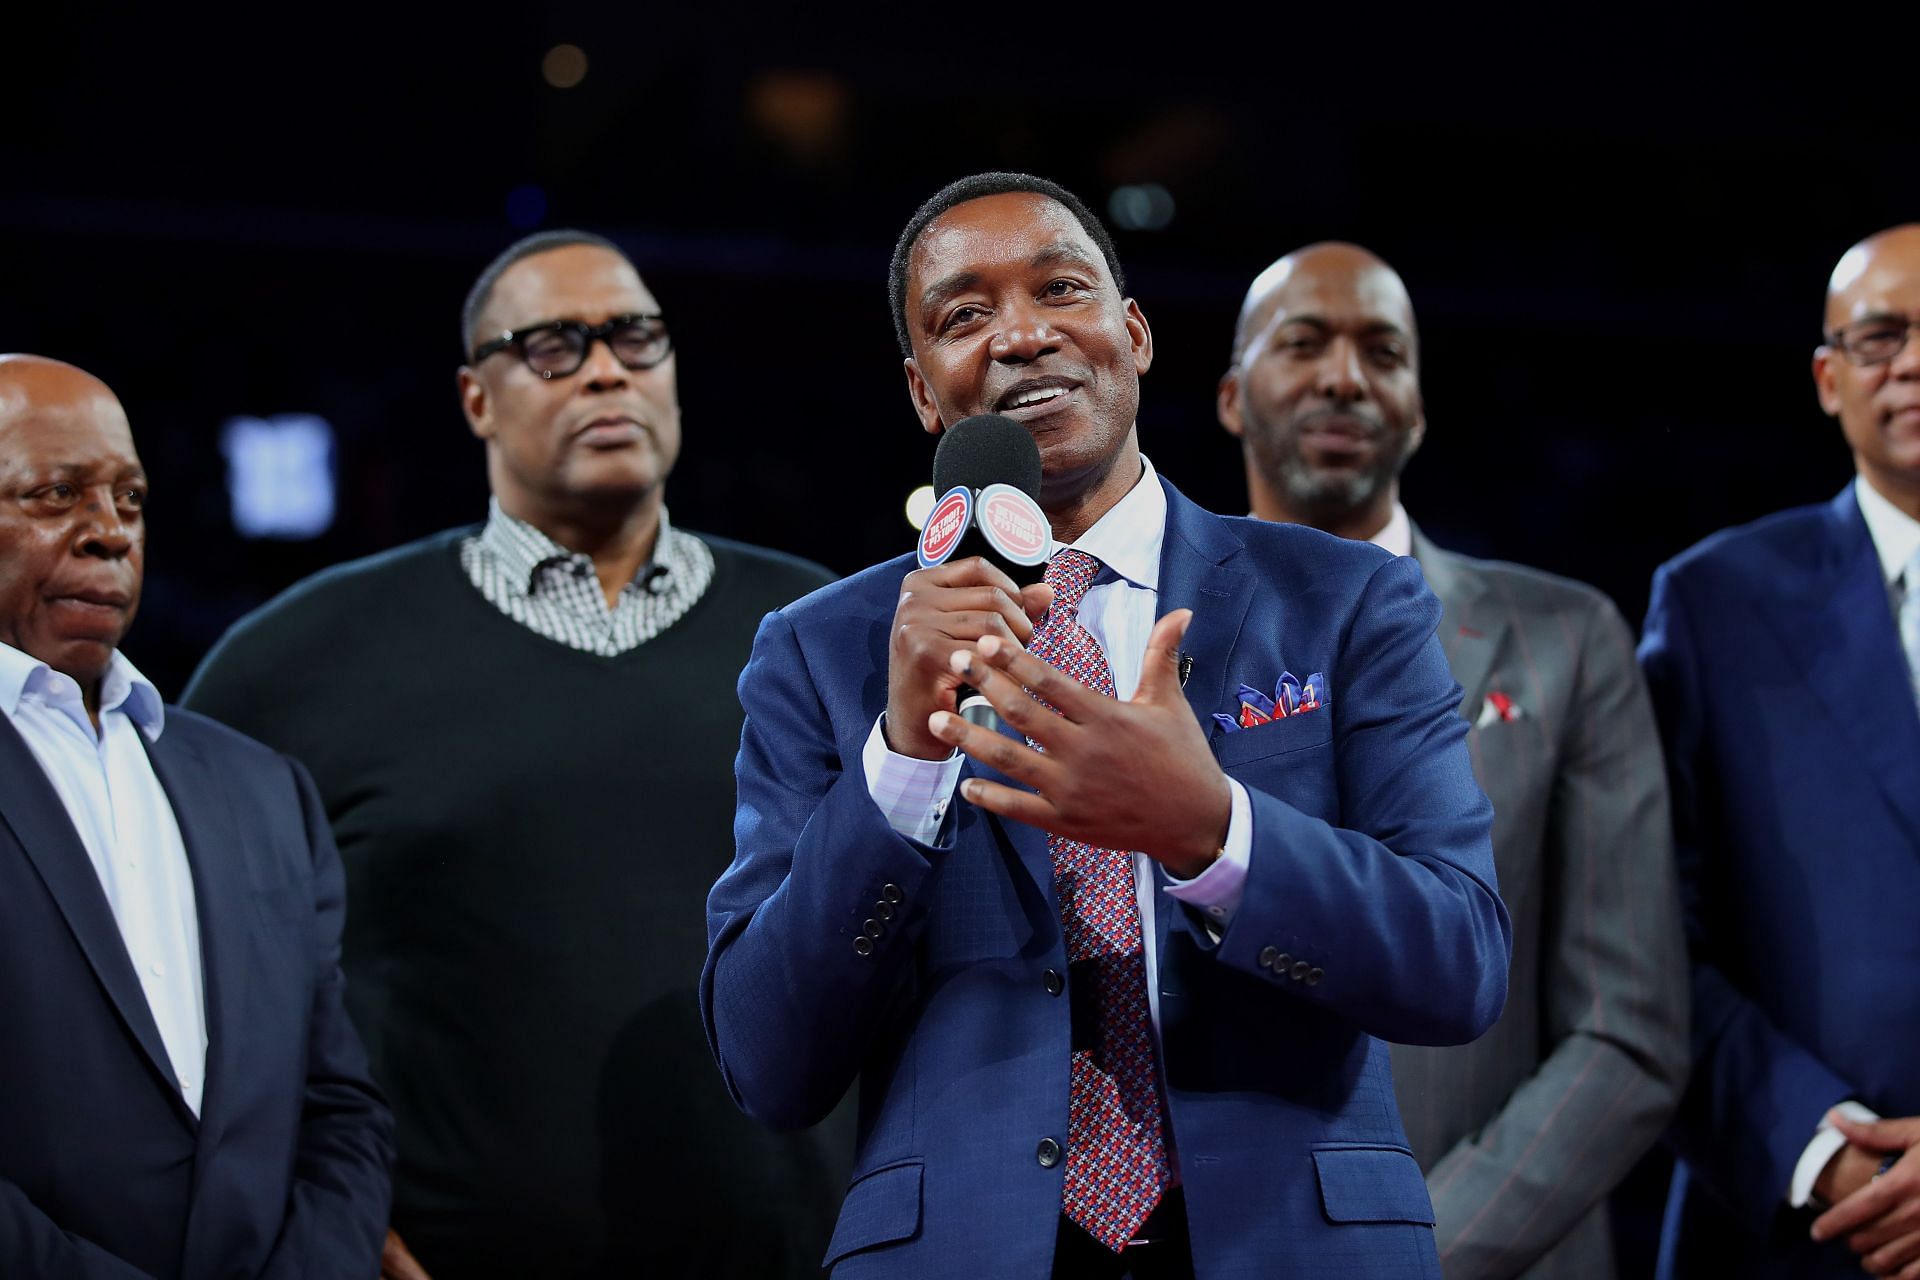 Isiah Thomas won back-to-back championships with the Detroit Pistons in 1989 and 1990.